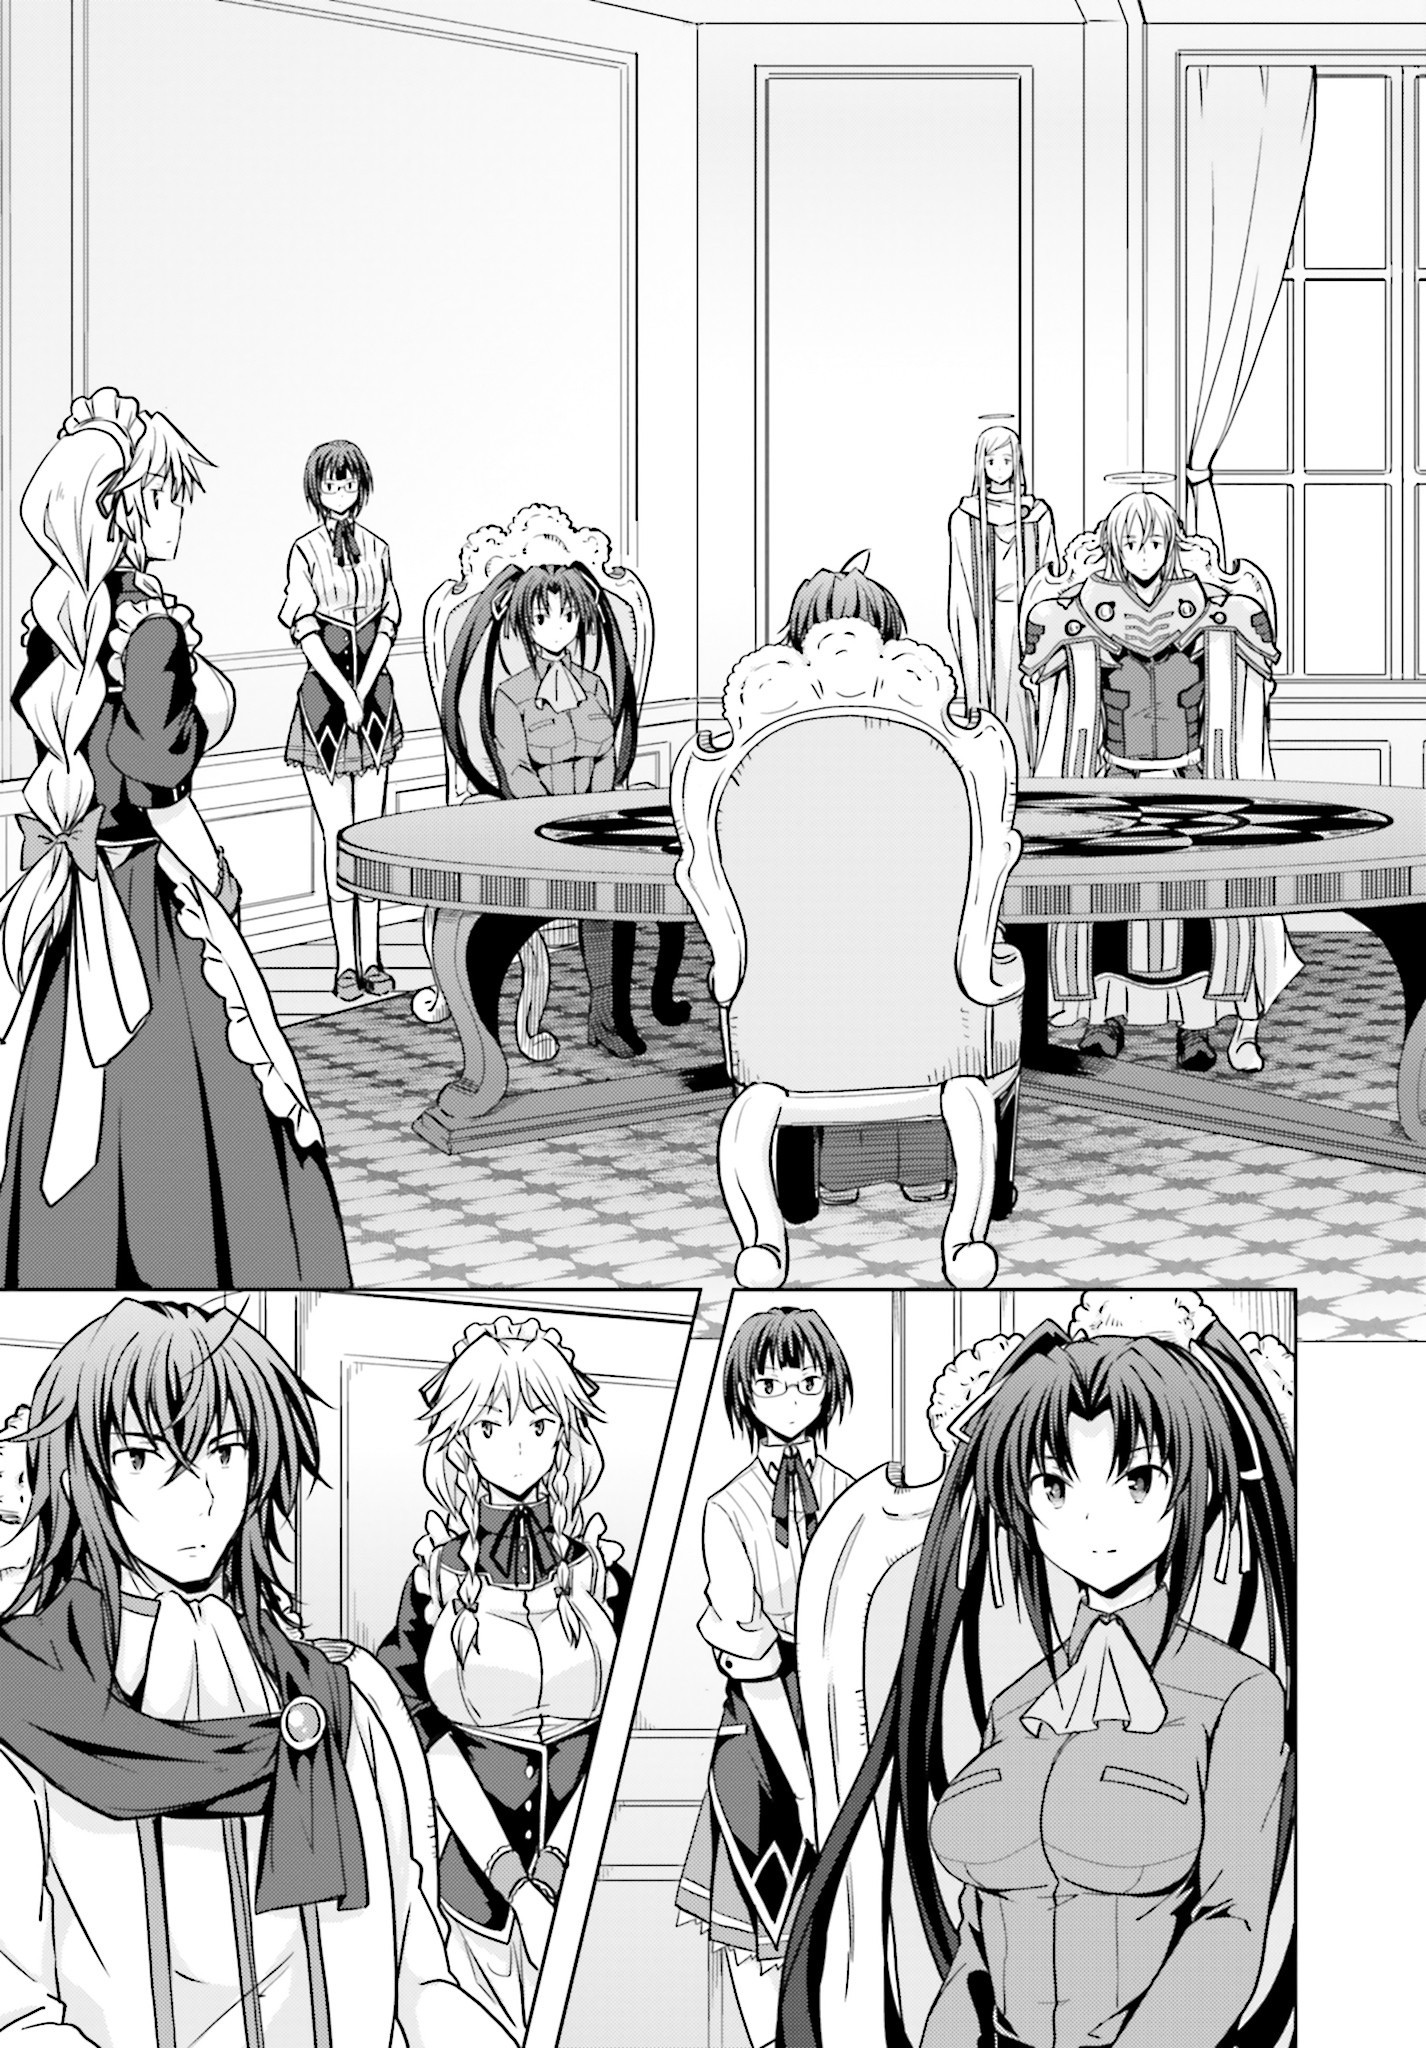 High-School DxD - ハイスクールD×D - Chapter 44 - Page 10